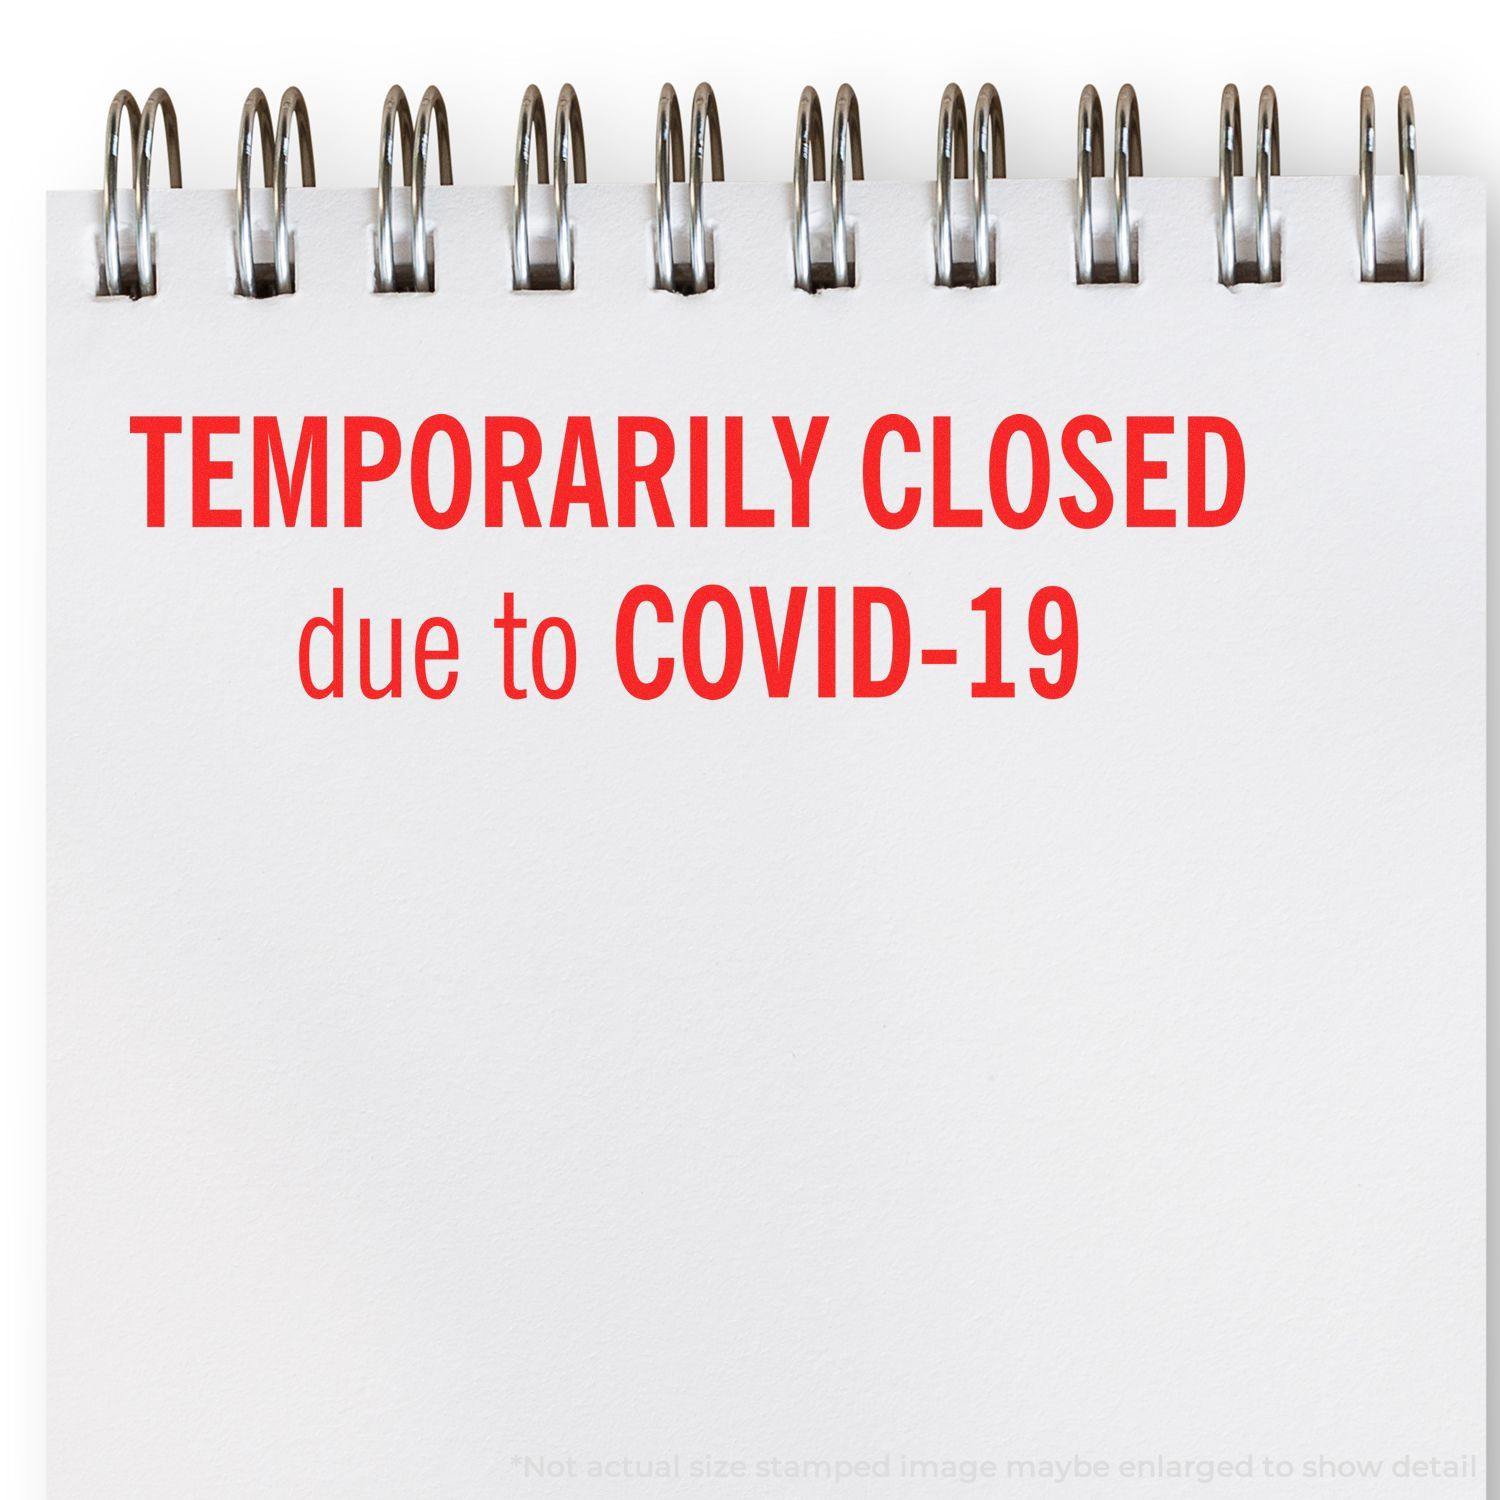 A self-inking stamp with a stamped image showing how the text "TEMPORARILY CLOSED due to COVID-19" is displayed after stamping.